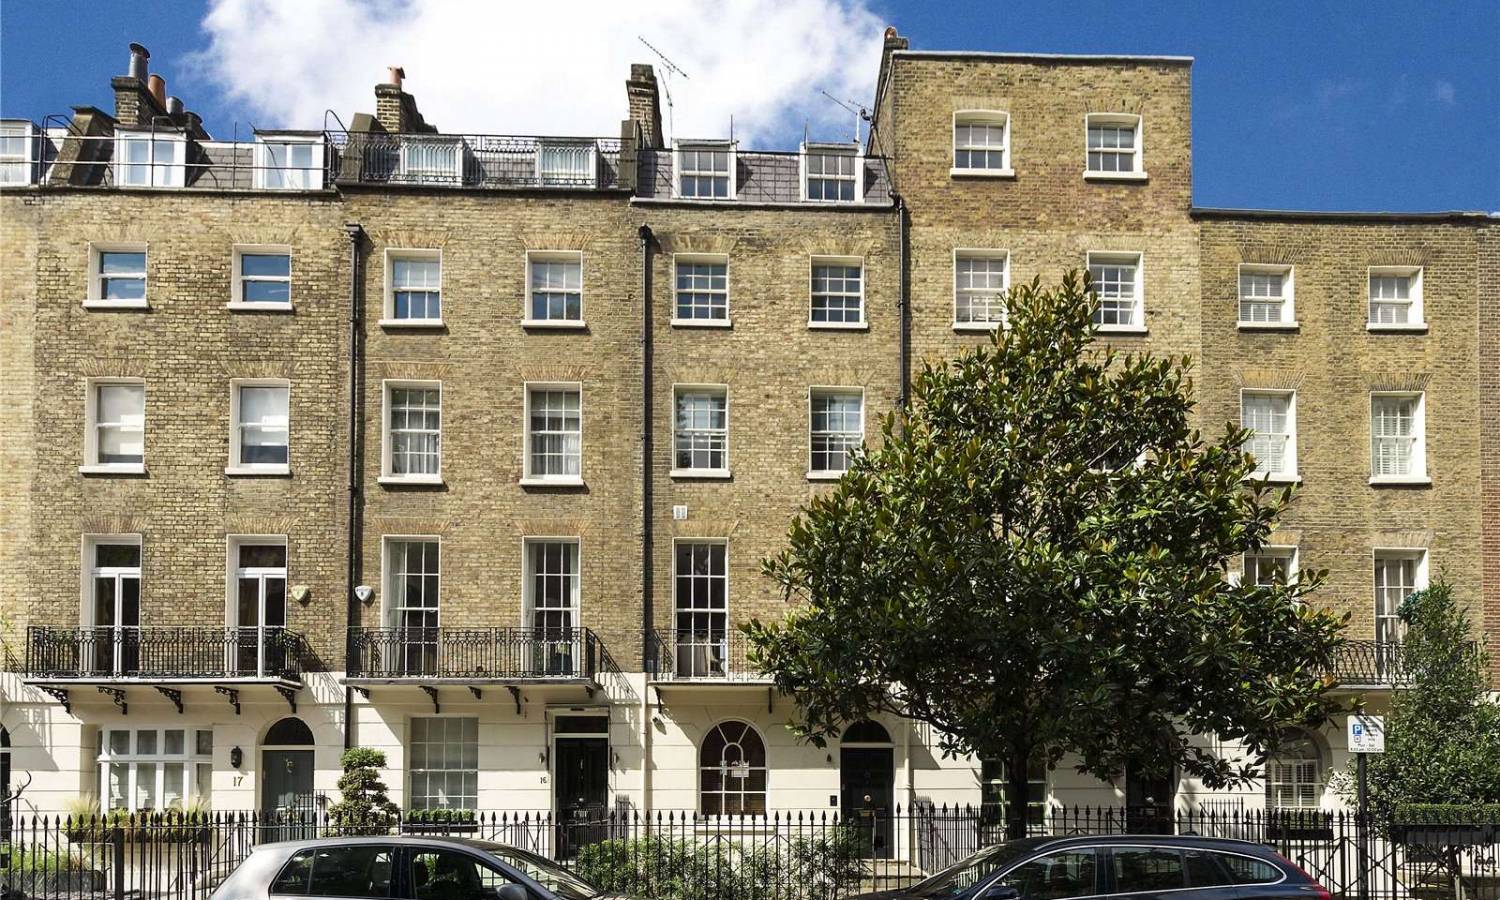 Old House Group gets a loan from CapitalRise for a residential transformation in Belgravia